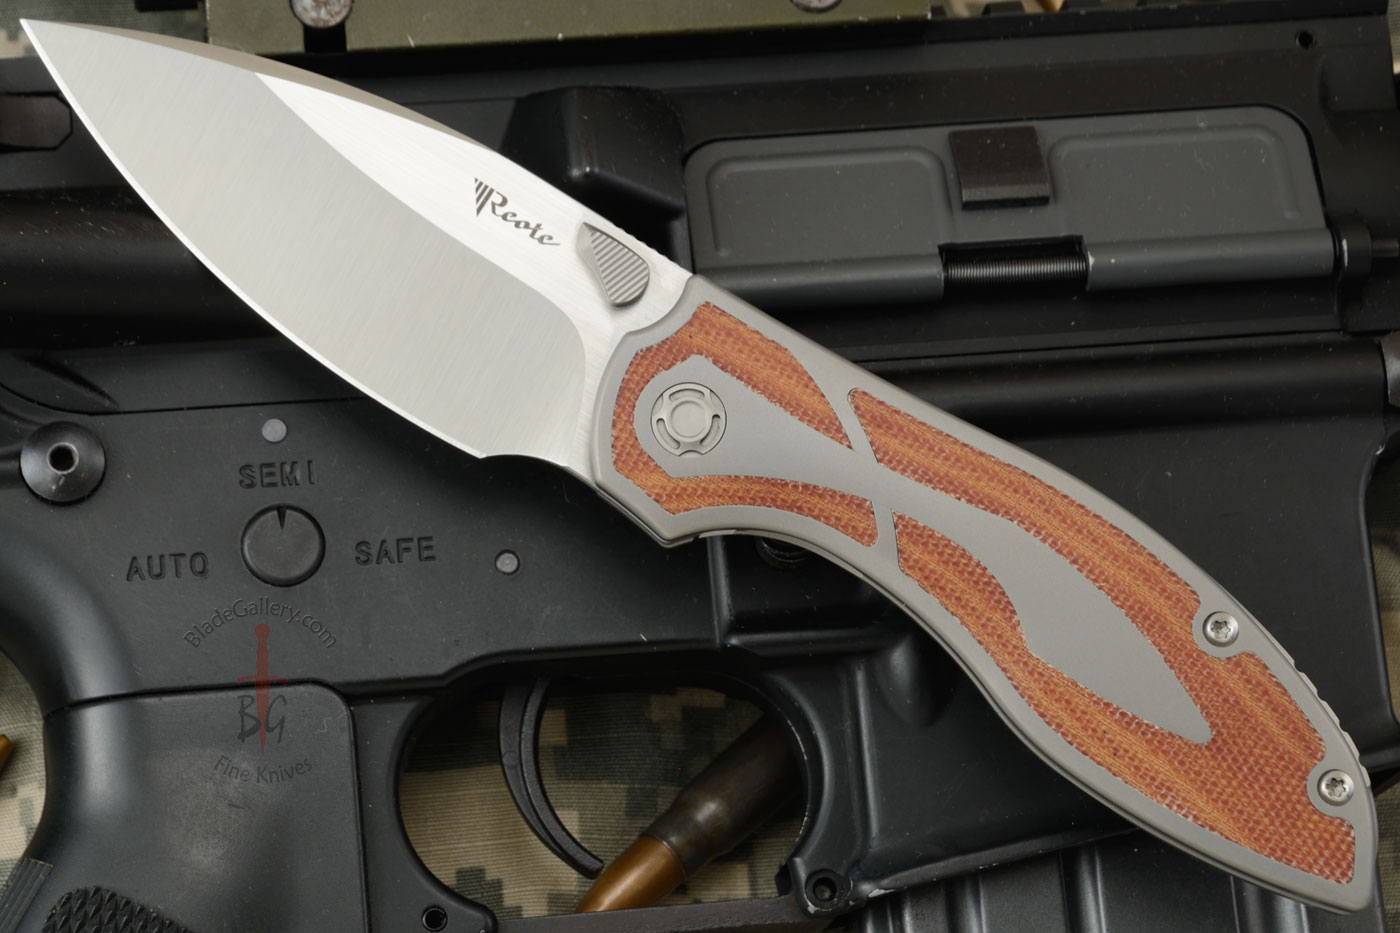 Reate Prototype #04 with Natural Micarta - M390